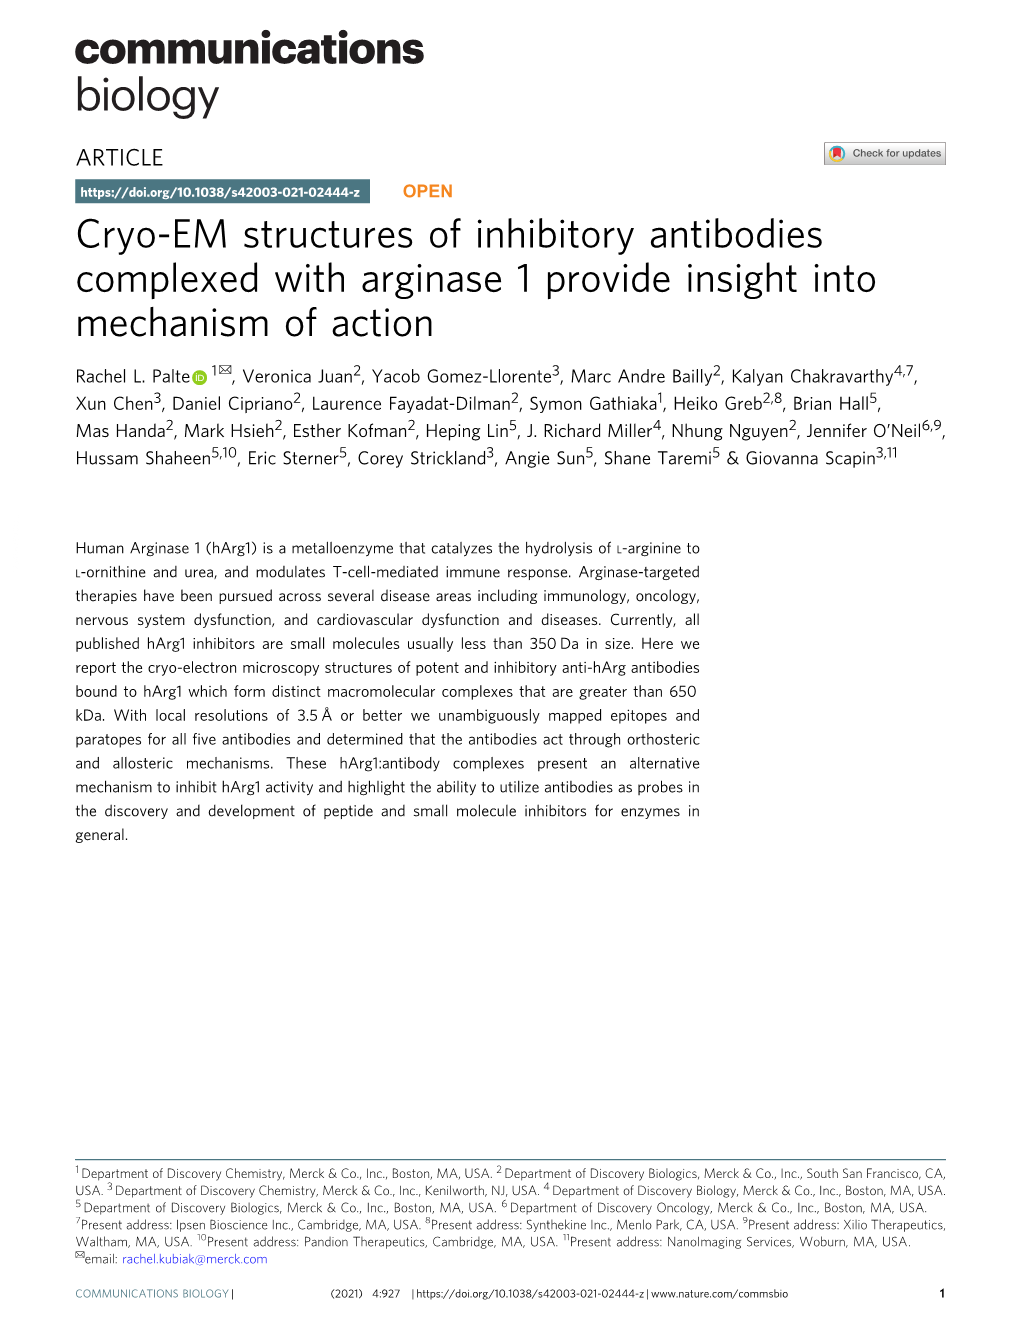 Cryo-EM Structures of Inhibitory Antibodies Complexed with Arginase 1 Provide Insight Into Mechanism of Action ✉ Rachel L